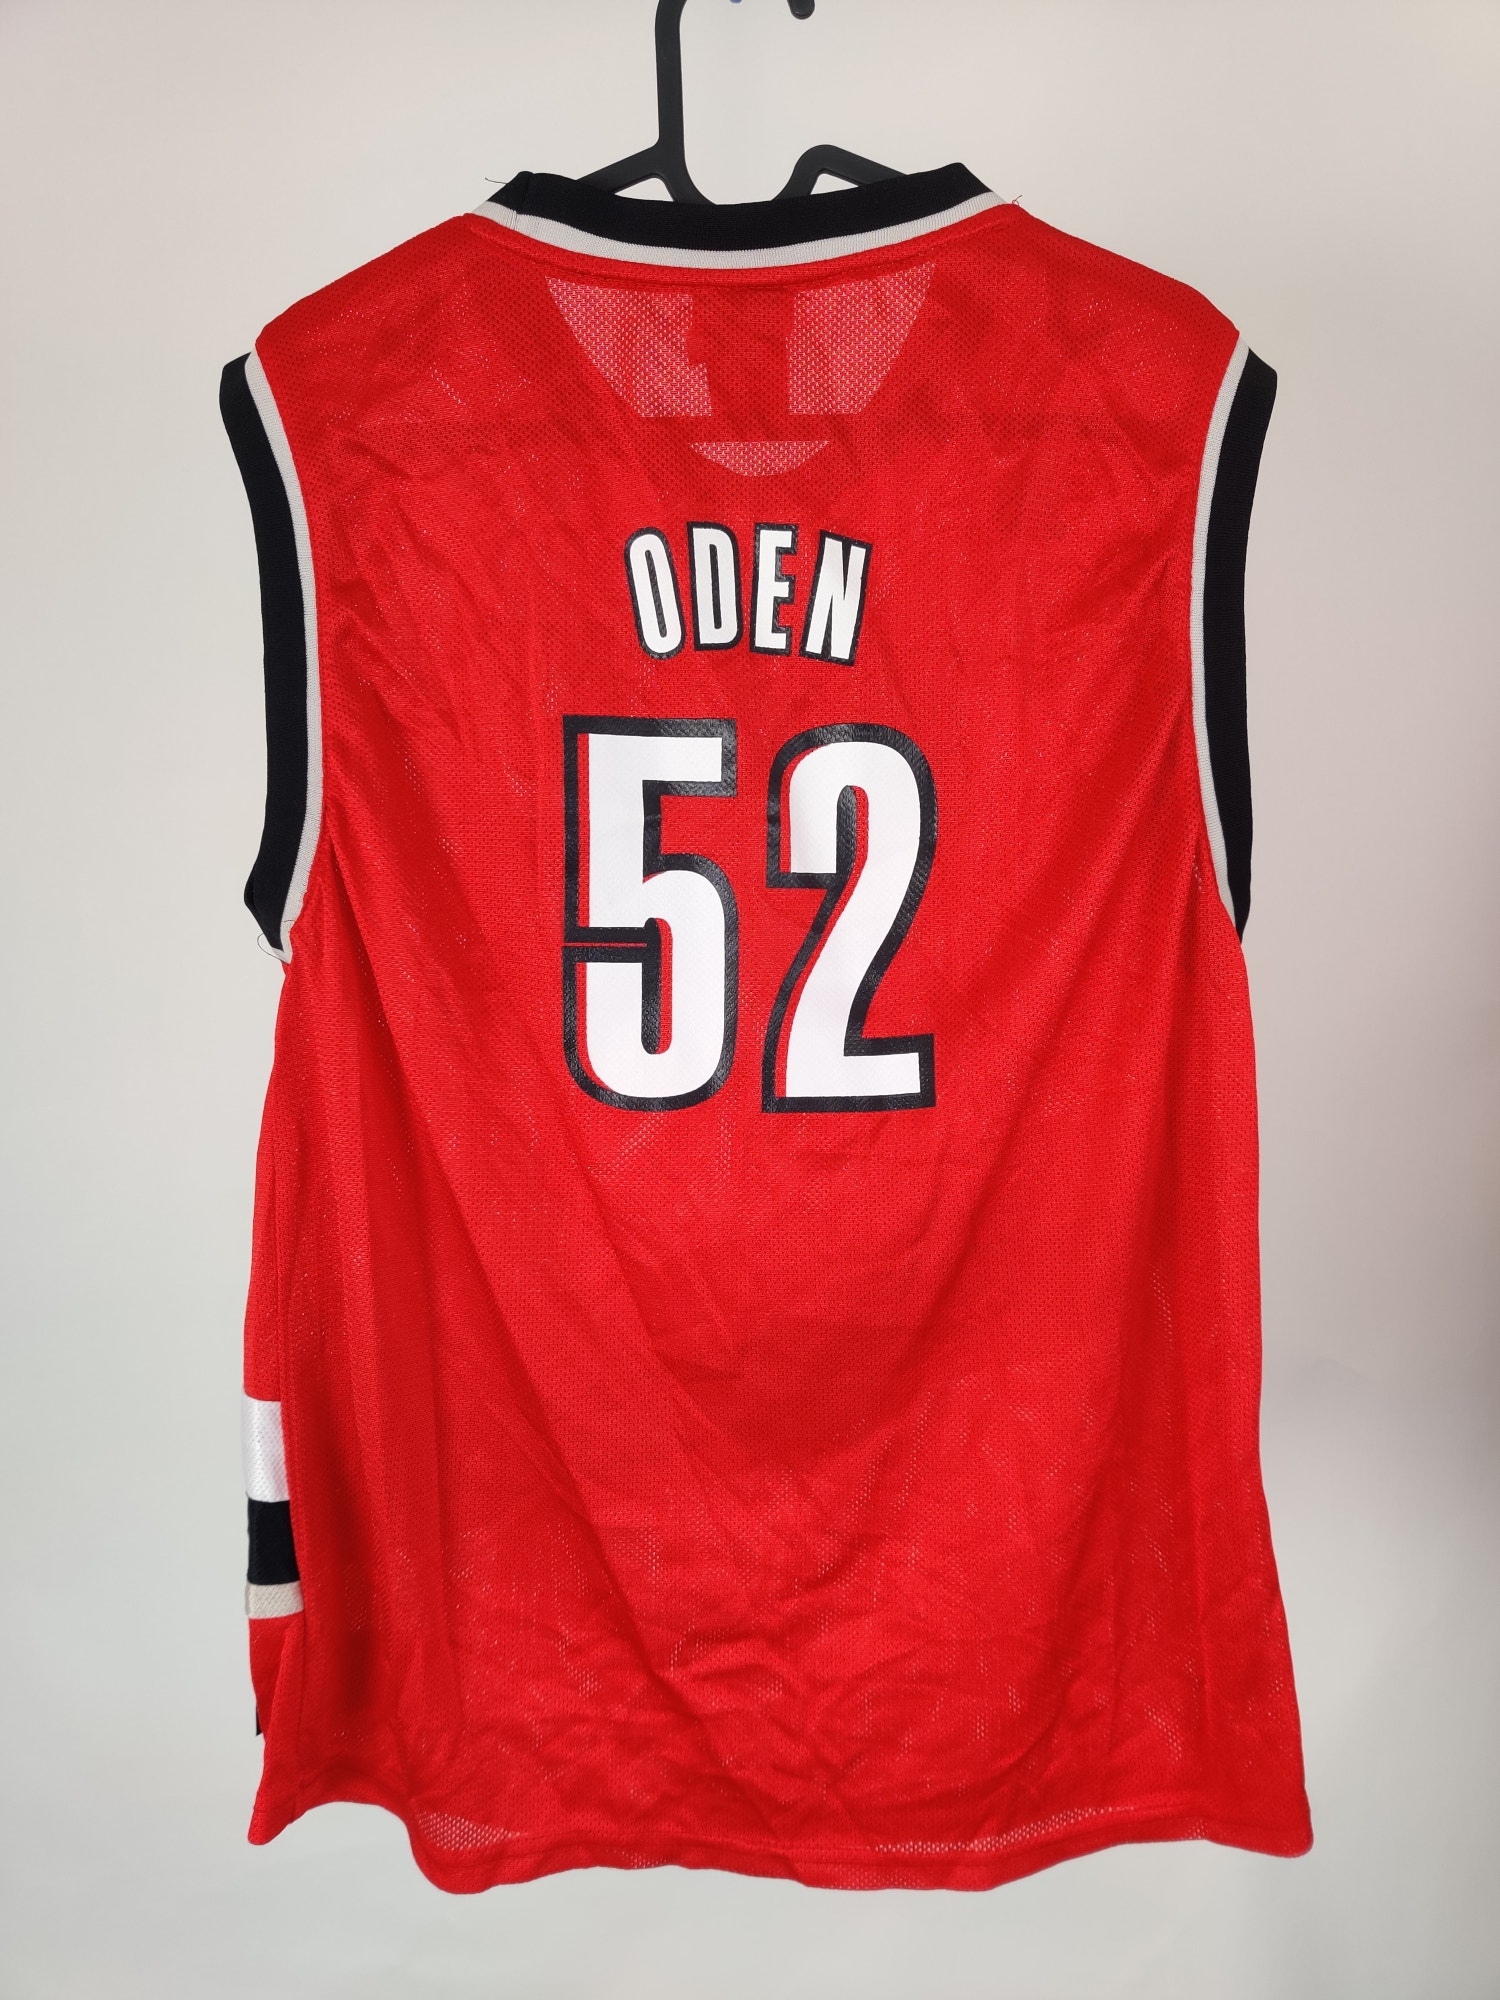 (V) Adidas NBA Portland Trail Blazers Youth jersey players Oden #52 sz XL  - Picture 10 of 11